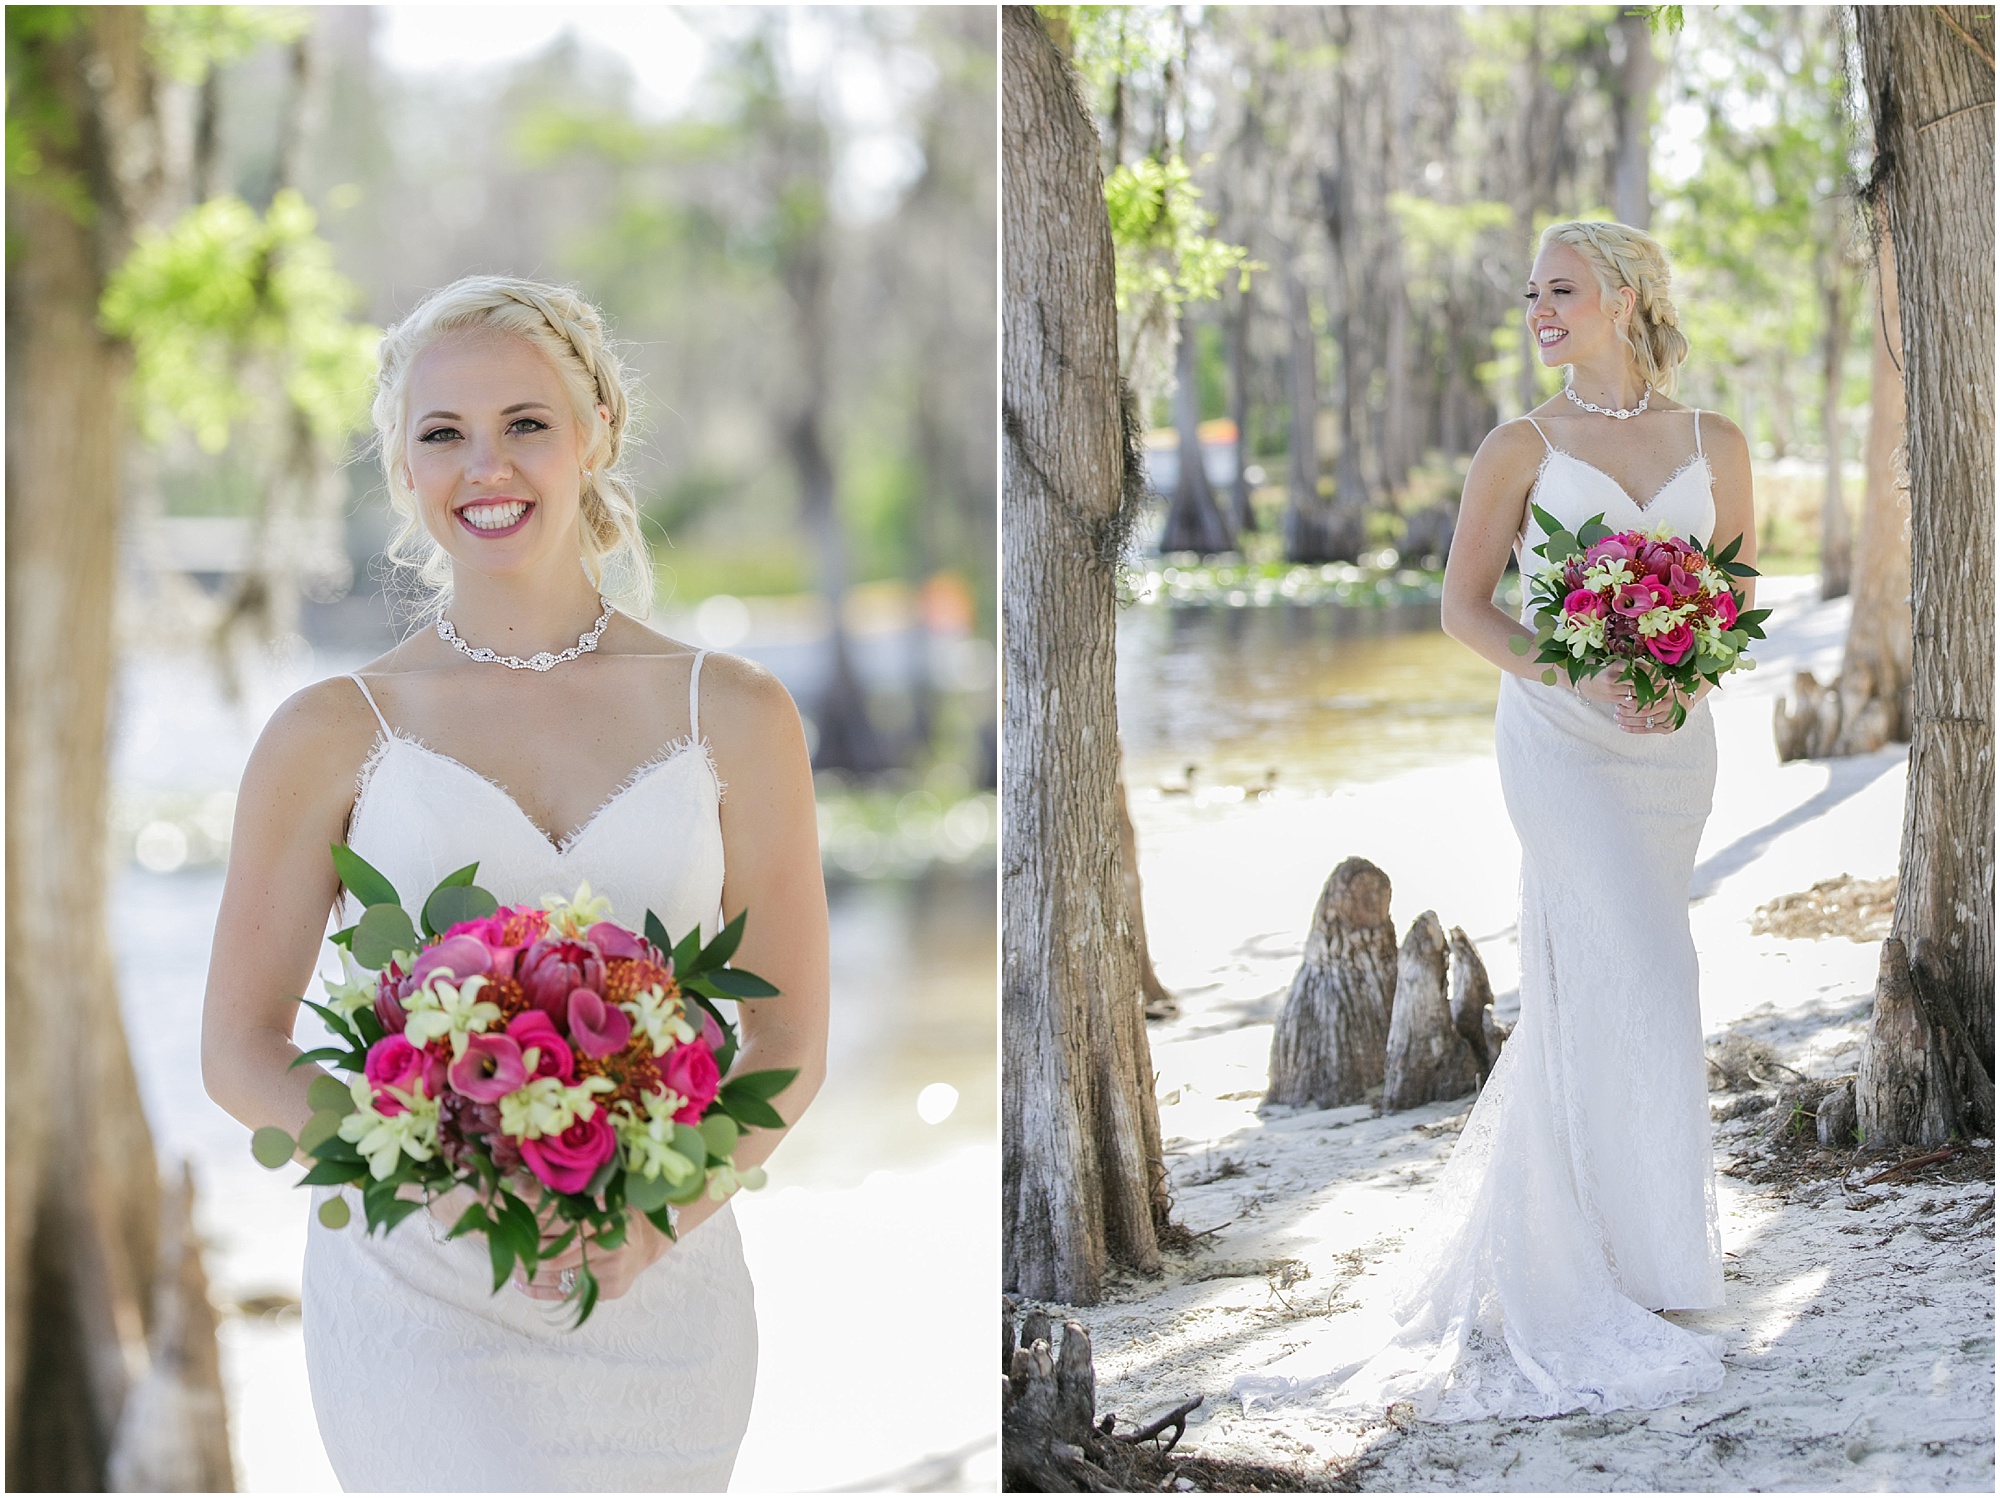 Photos of the bride outdoors while she is holding her bouquet of various bright pink flowers.